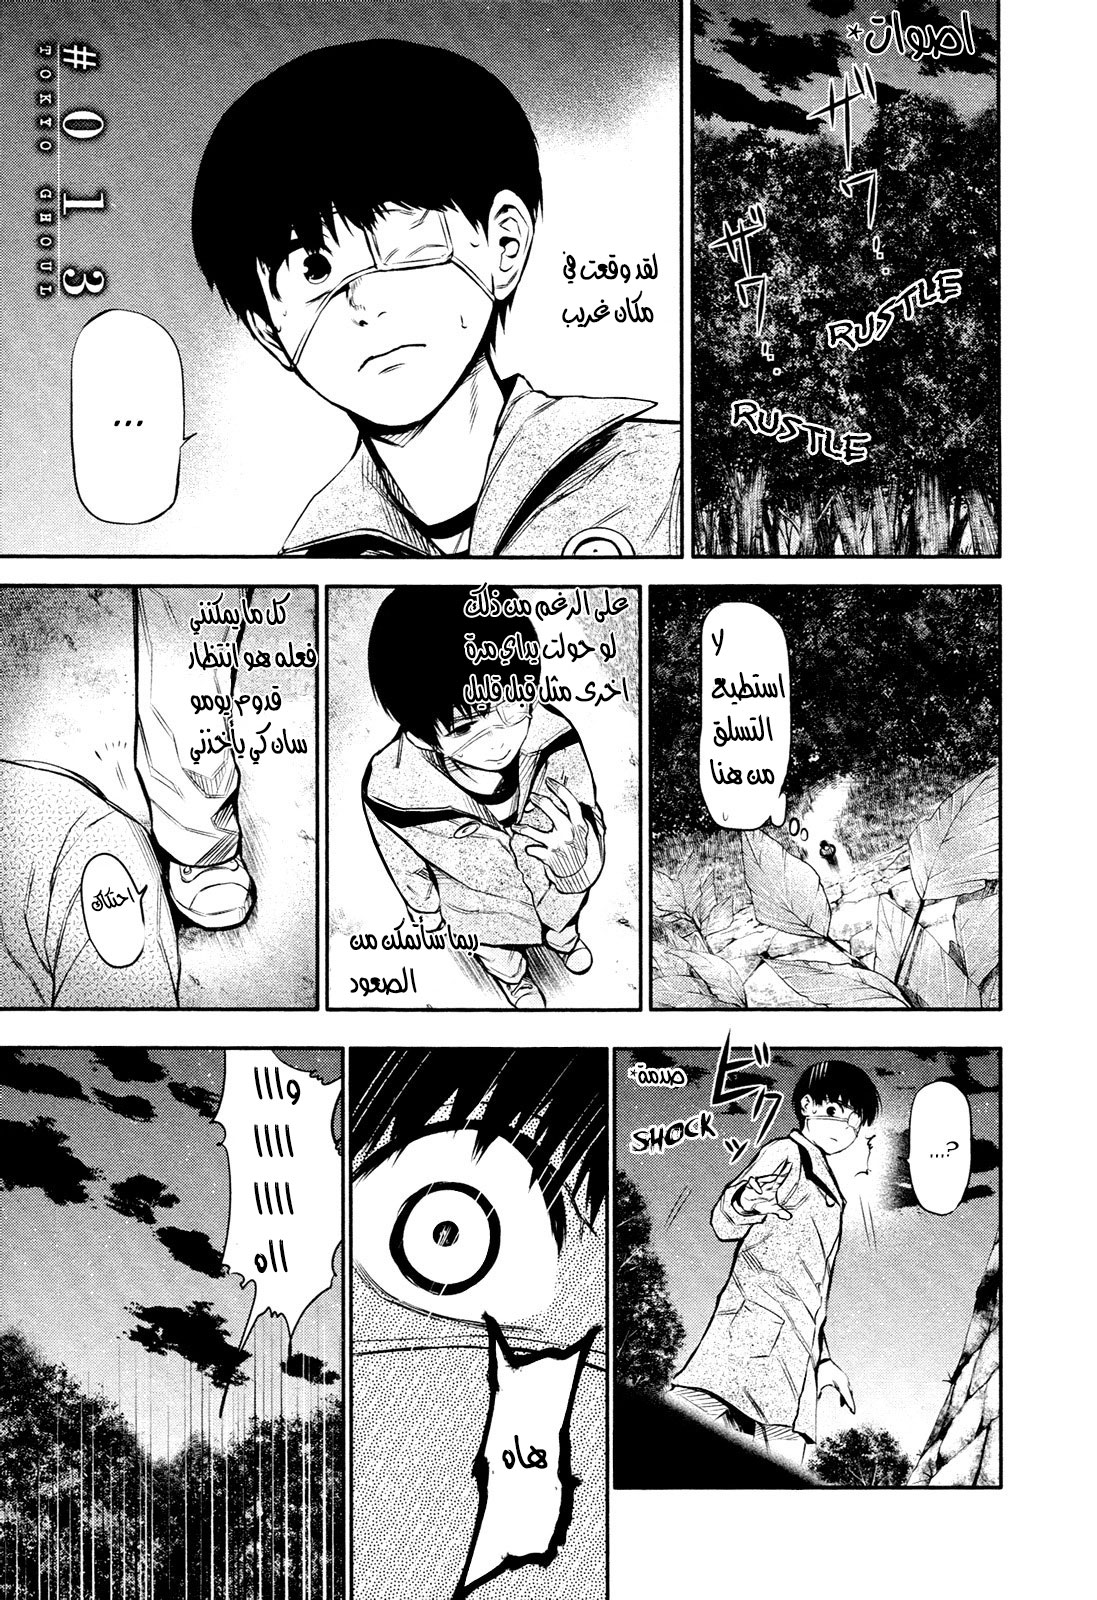 Tokyo Ghoul: Chapter 13 - Page 1